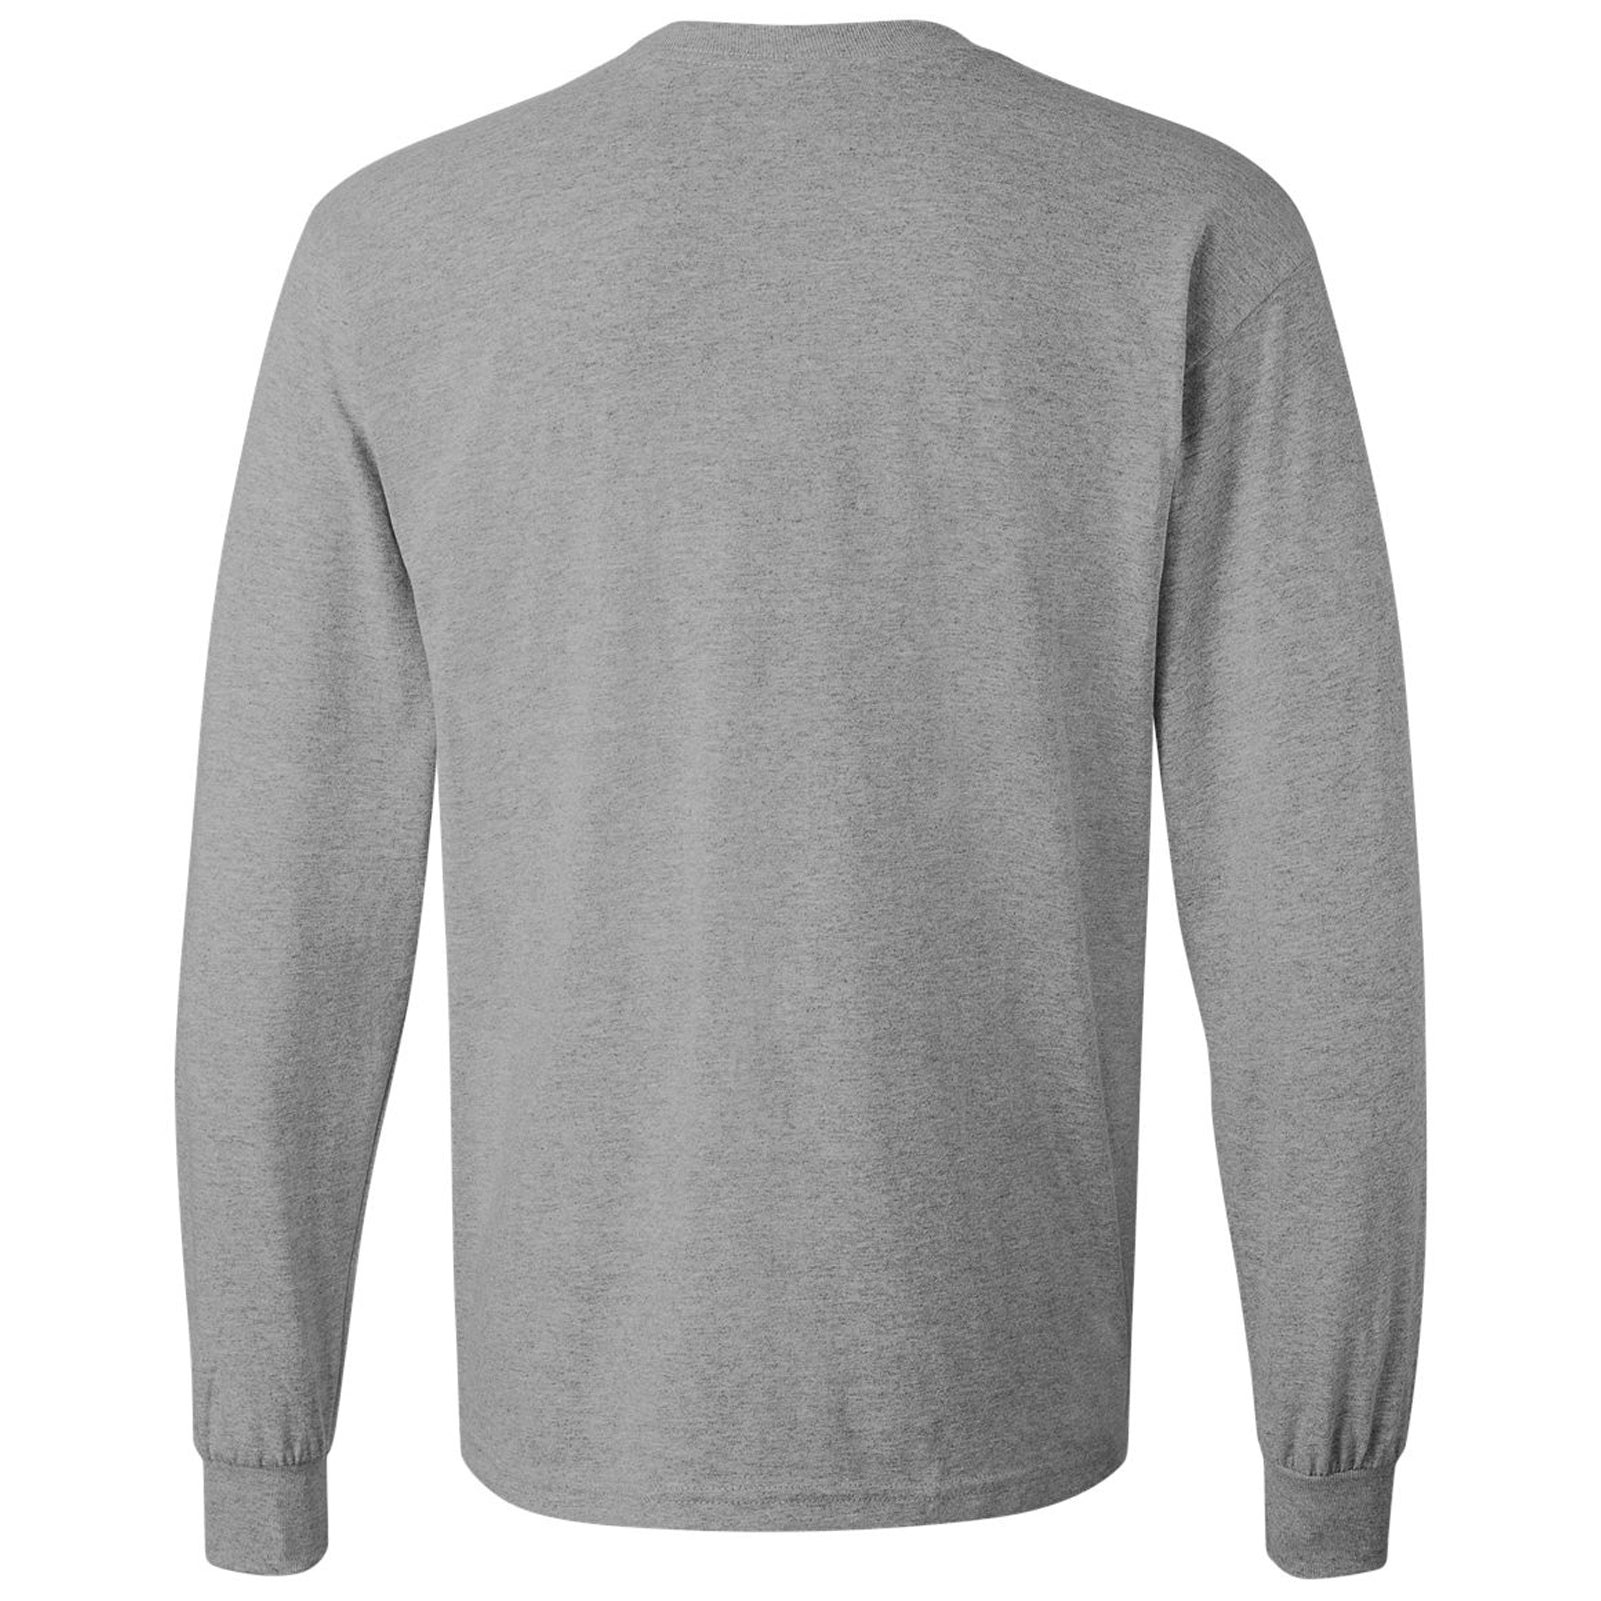 Antigua Iowa Cubs Grey Fortune Long Sleeve 1/4 Zip Fashion Pullover, Grey, 100% POLYESTER, Size 4XL, Rally House